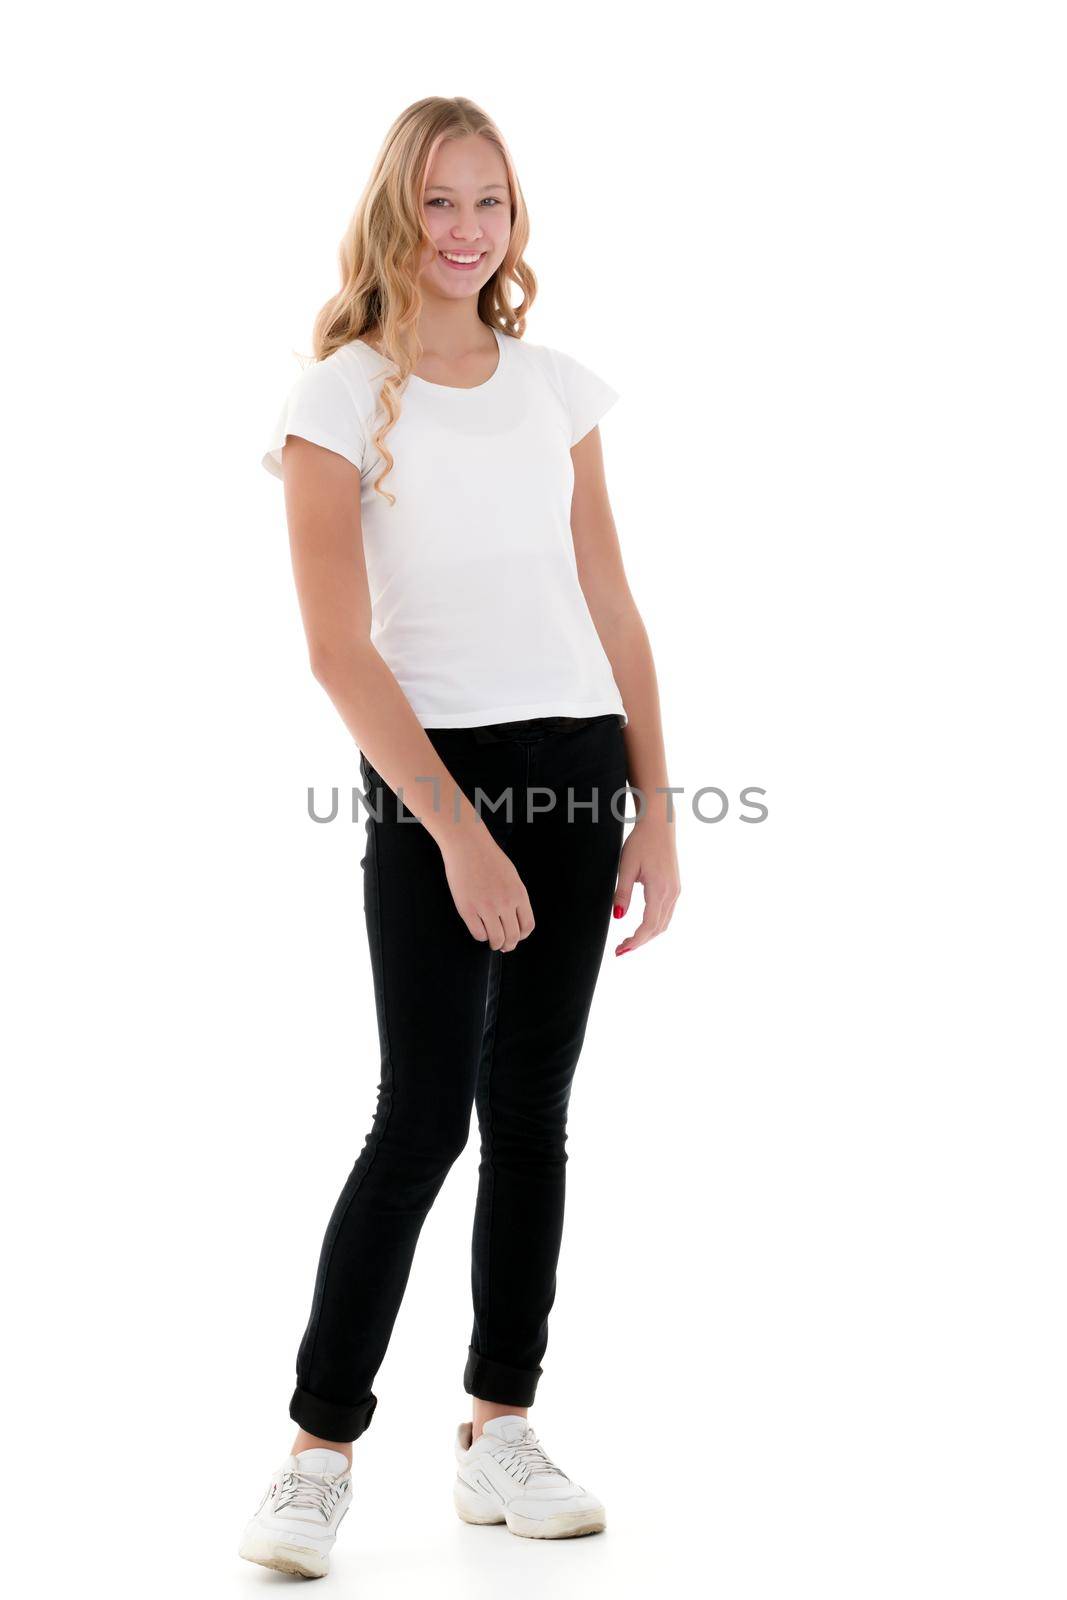 A little school girl in a white empty T-shirt. The concept of advertising and design of T-shirts. Isolated on white background.